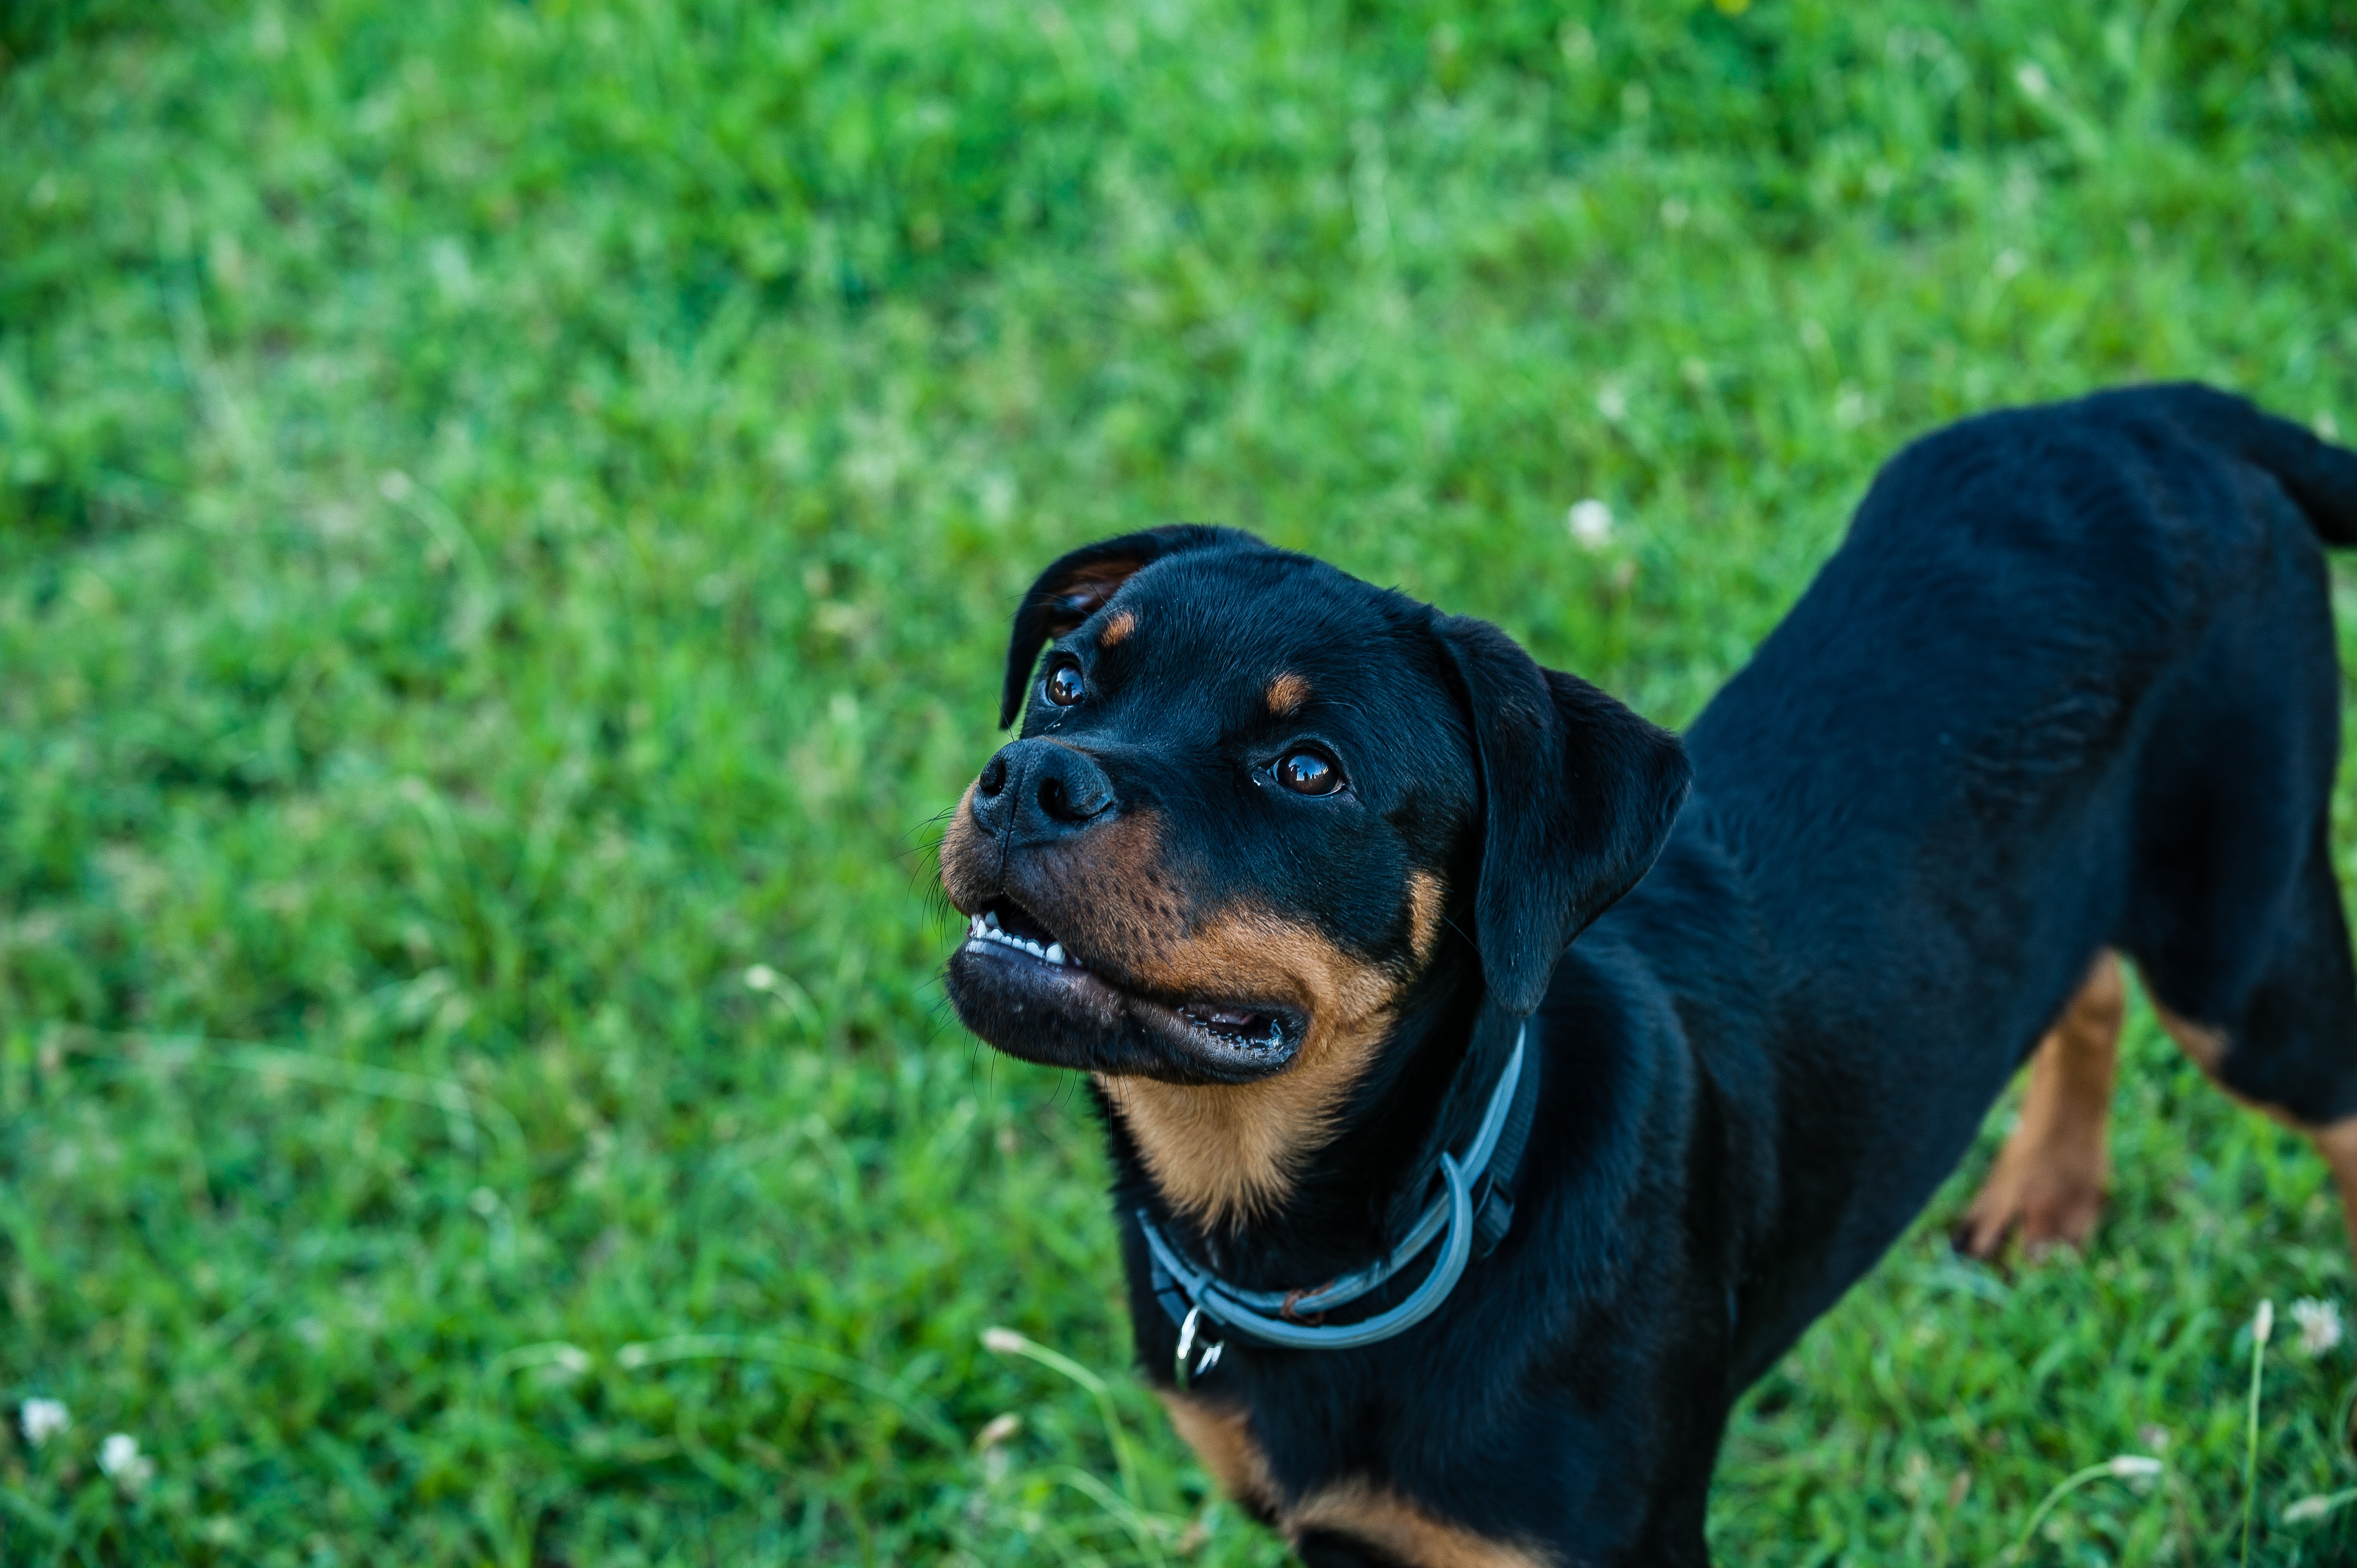 How much exercise time does a Rottweiler dog need daily?